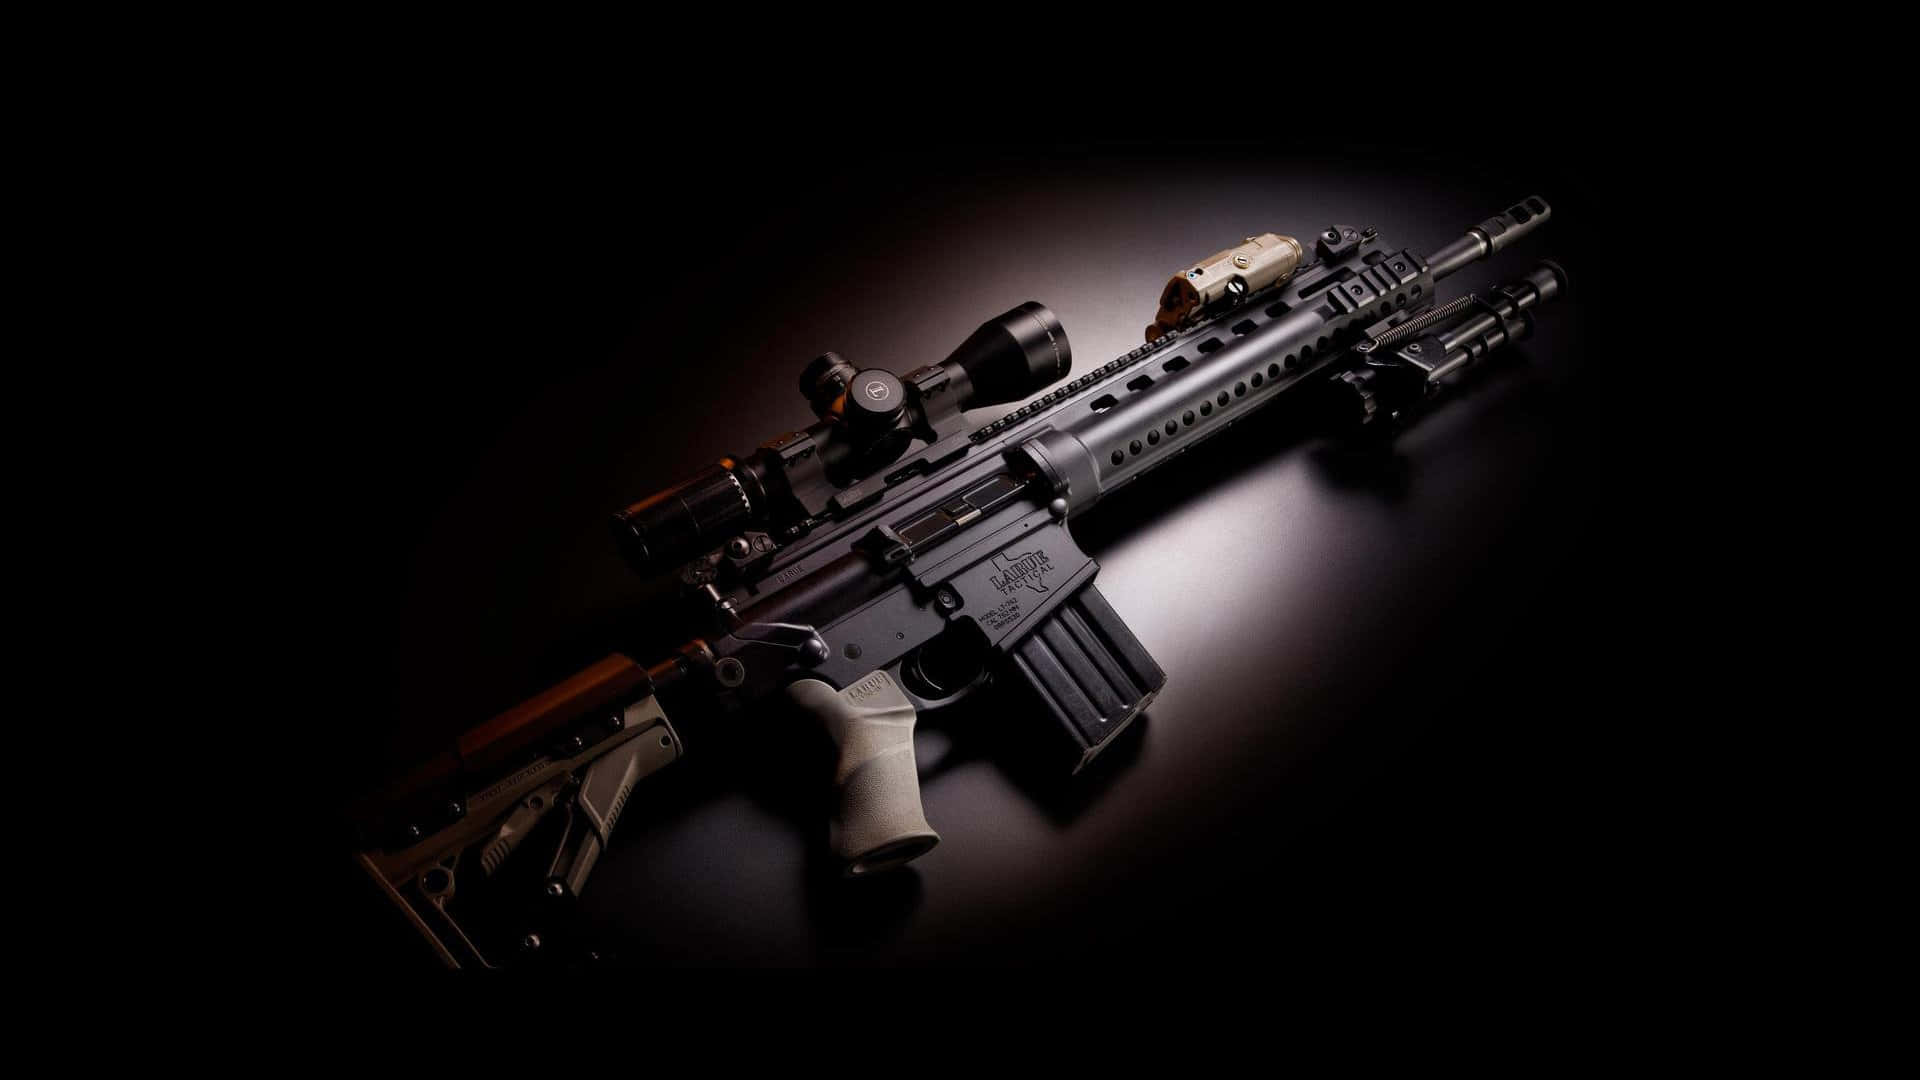 The classic style of a rifle, perfect for hunting.